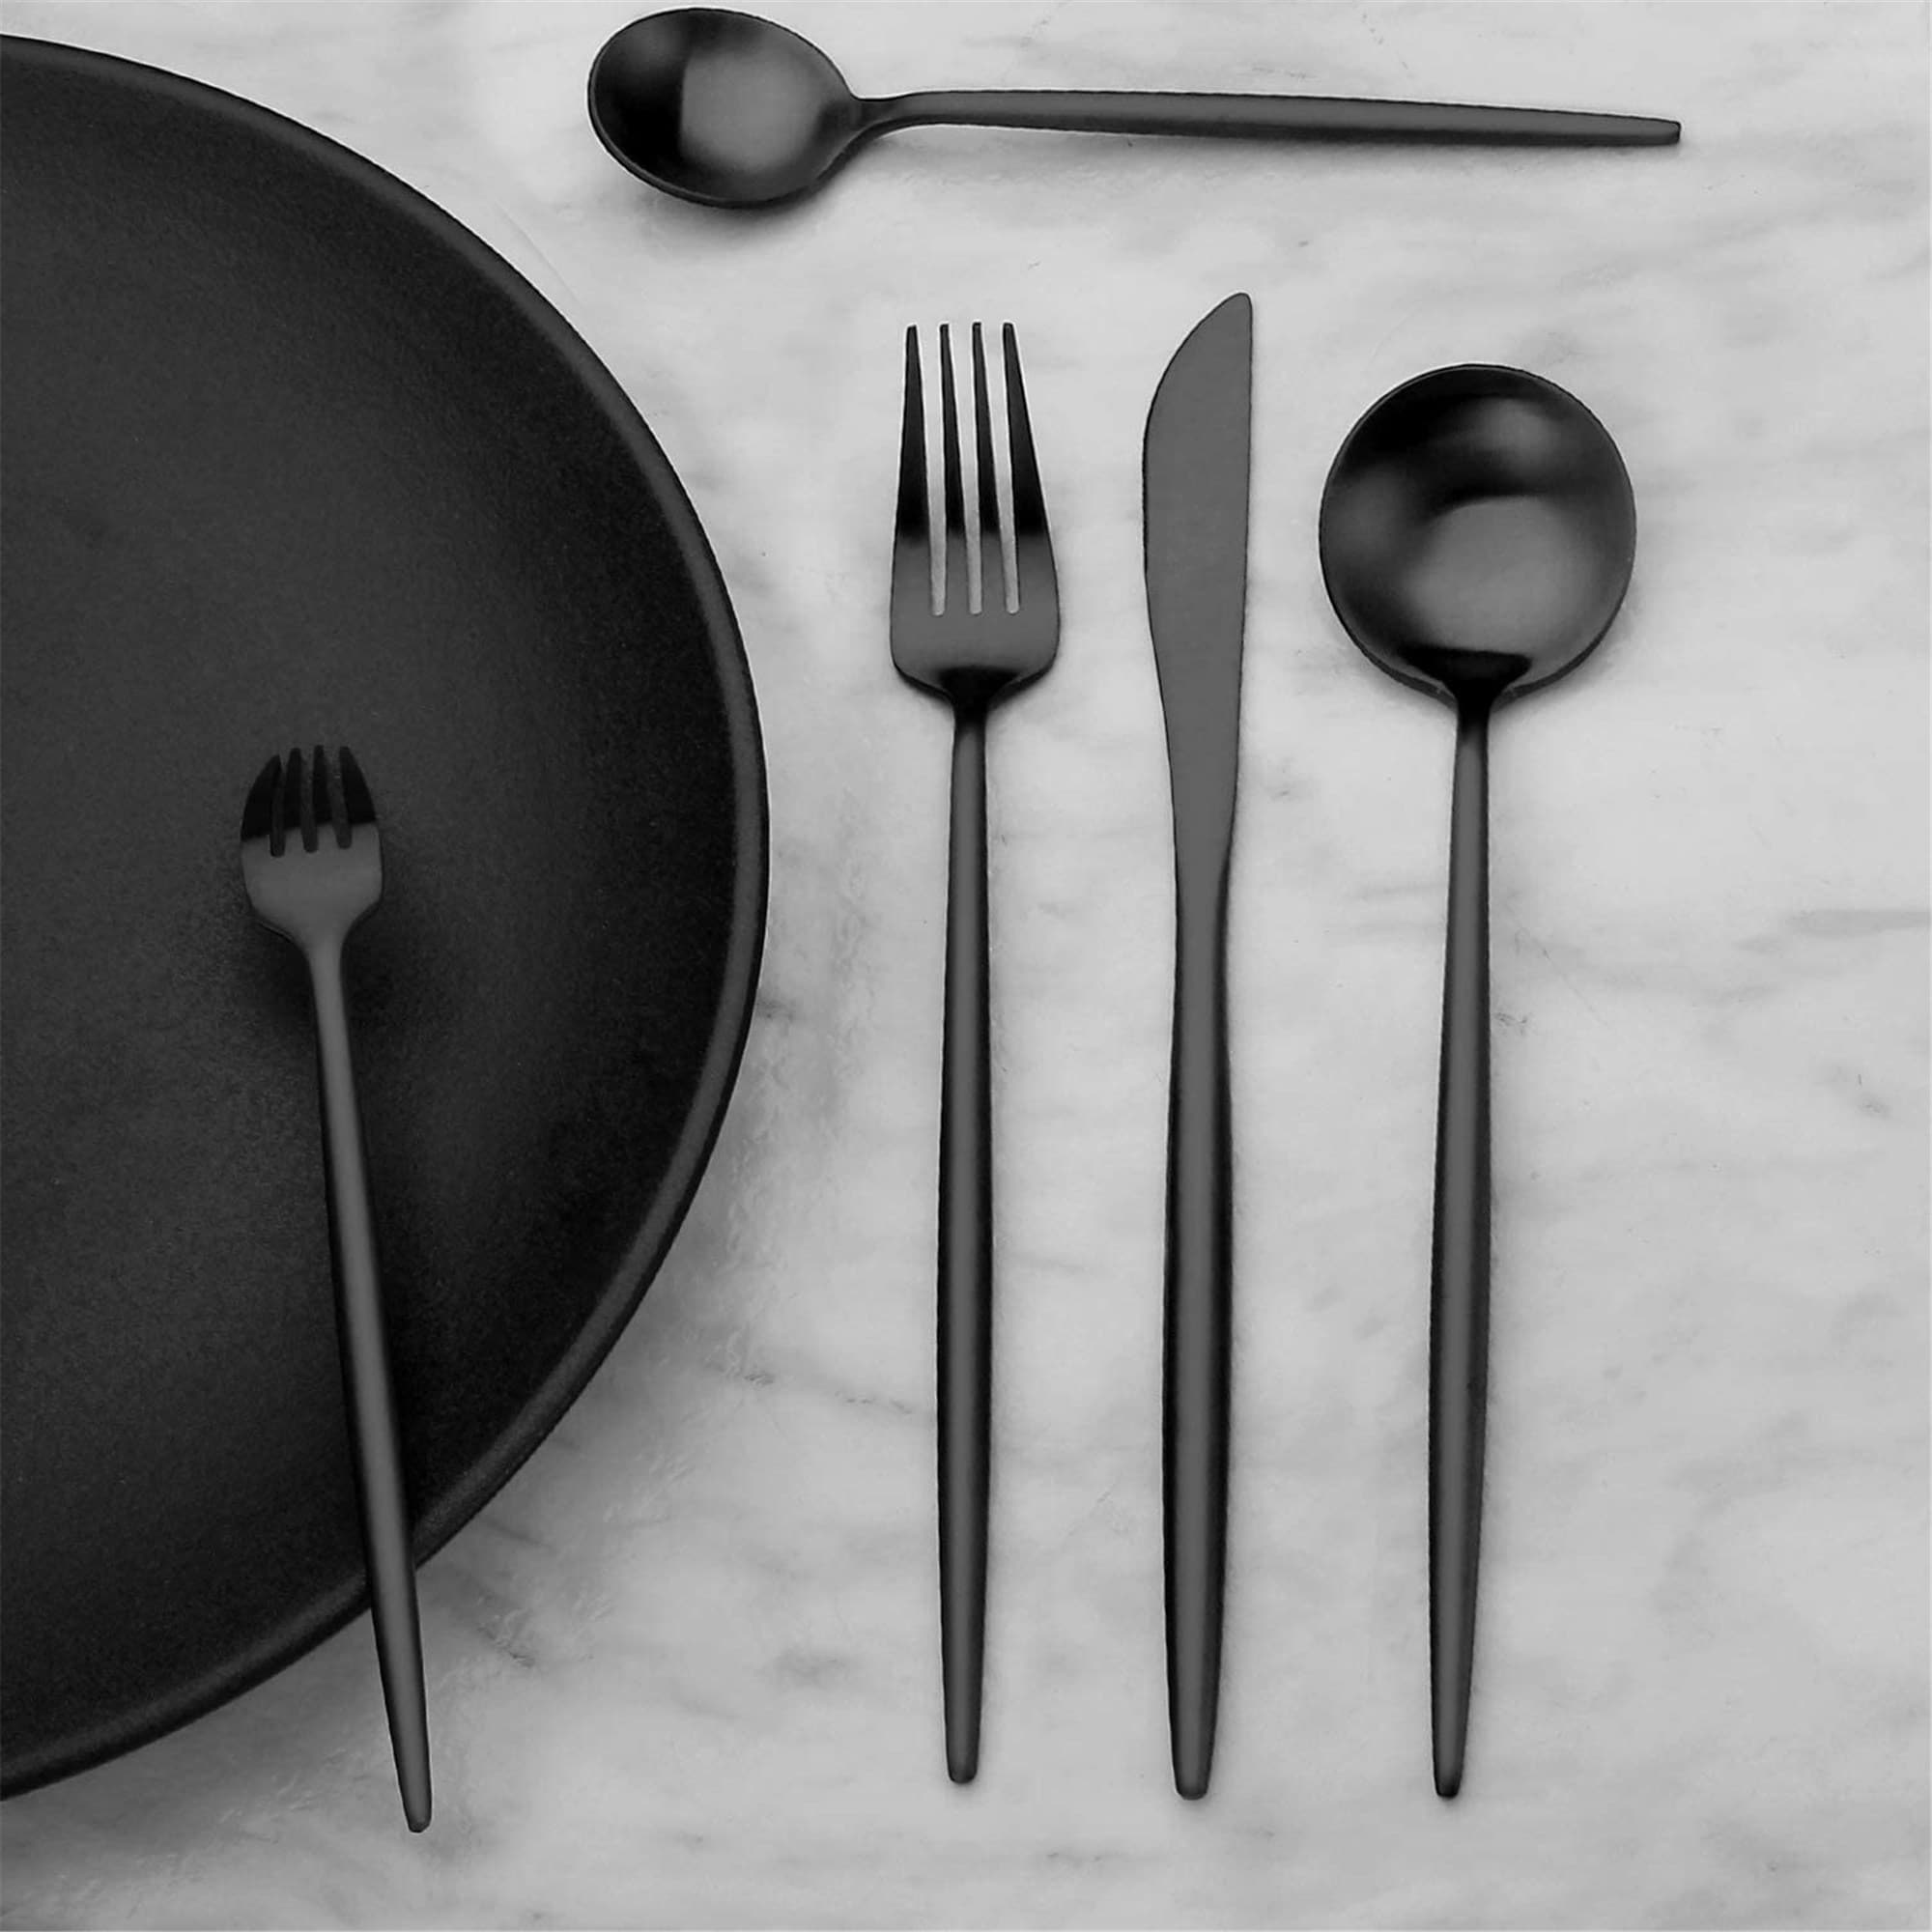 https://ak1.ostkcdn.com/images/products/is/images/direct/7a834db4a473e1d14eb334cdf8f7e3b54e4bbaaf/Matte-Black-Silverware-Set-Stainless-Steel-Satin-Finish-Flatware-Cutlery-Set-Service-for-4%2C-Dishwasher-Safe-%28Matte-Black%2C-20-P%29.jpg